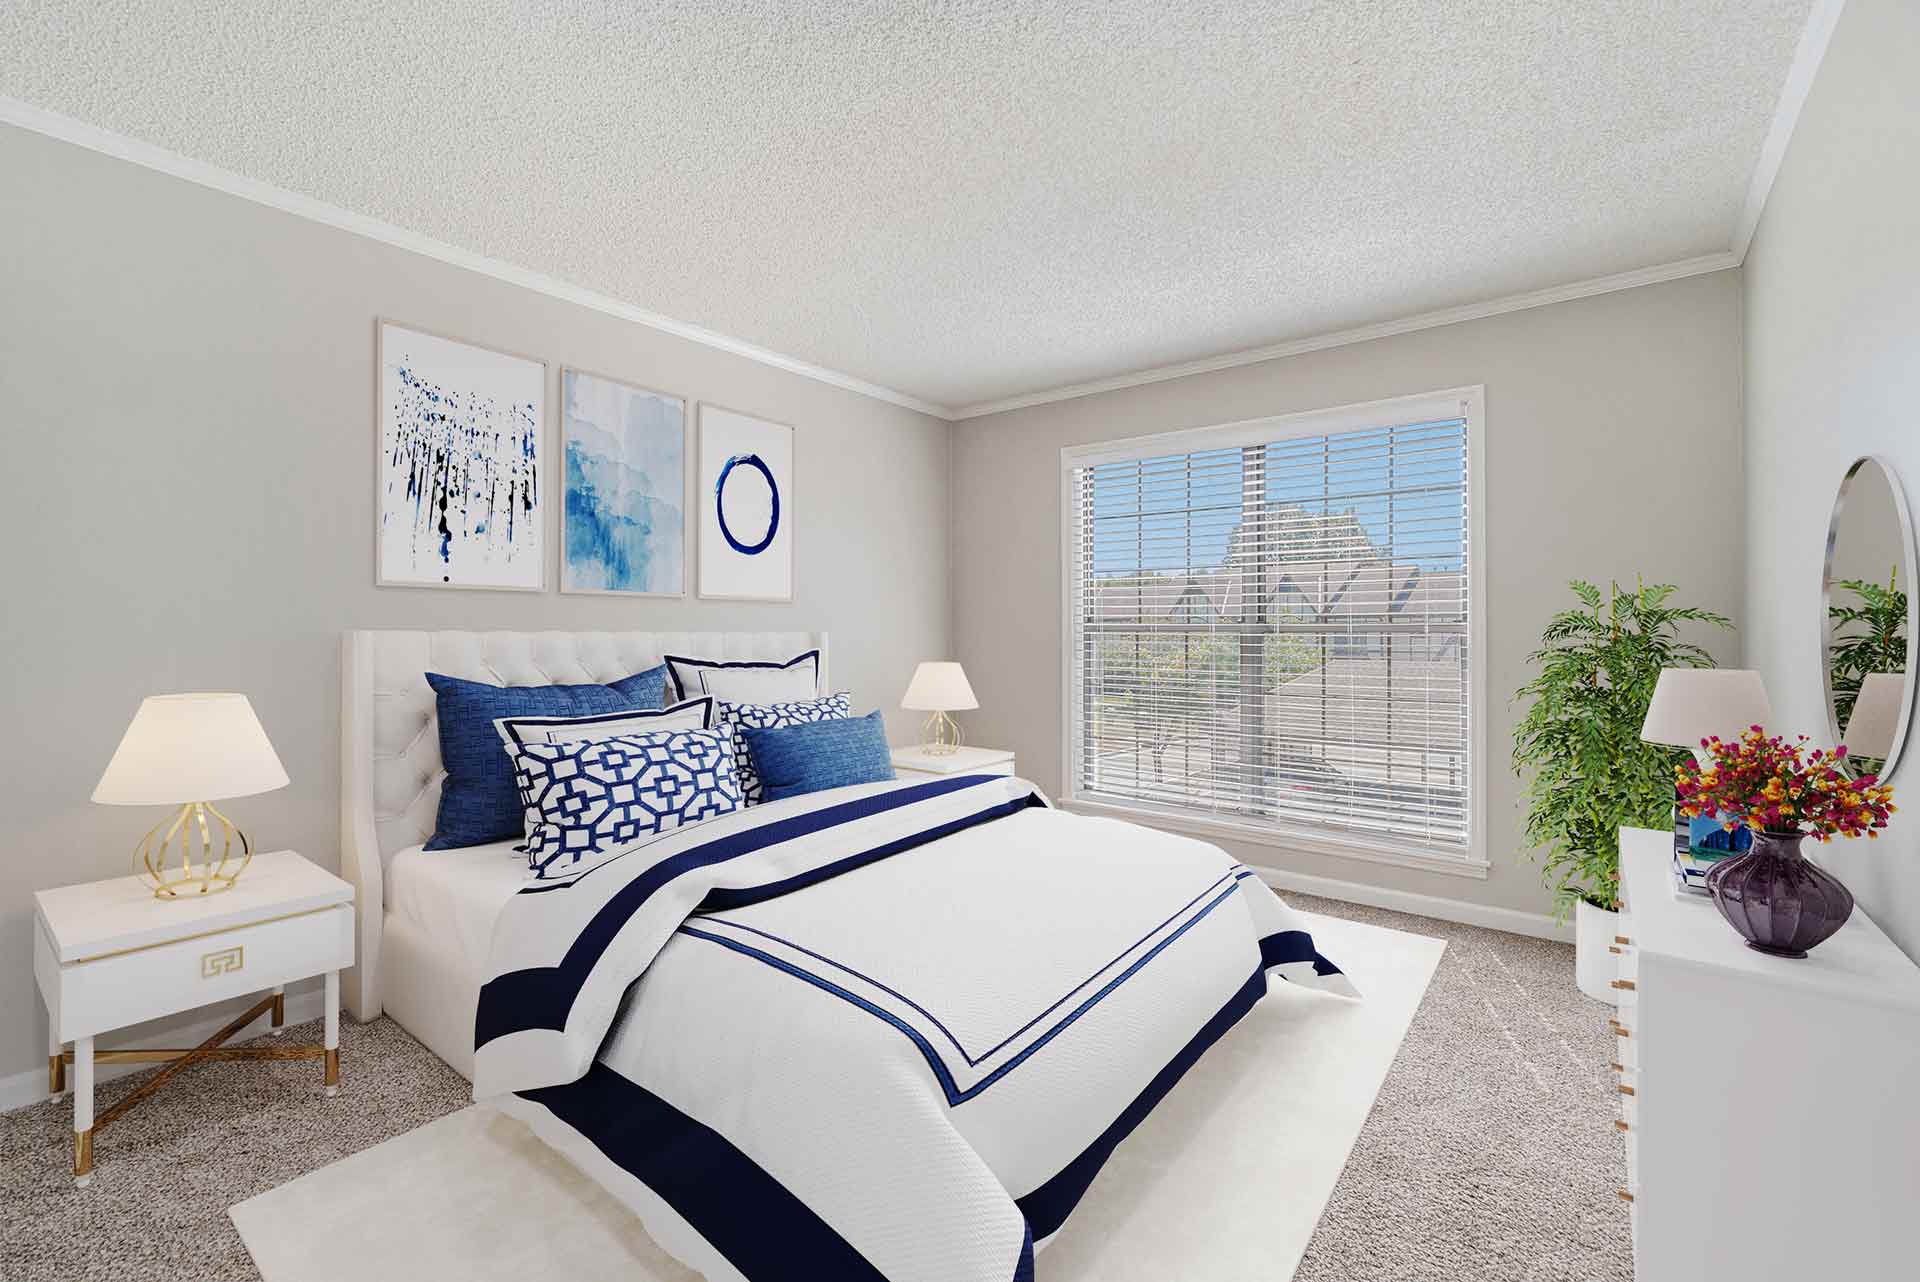 Corinth place luxurious interior staged bedroom